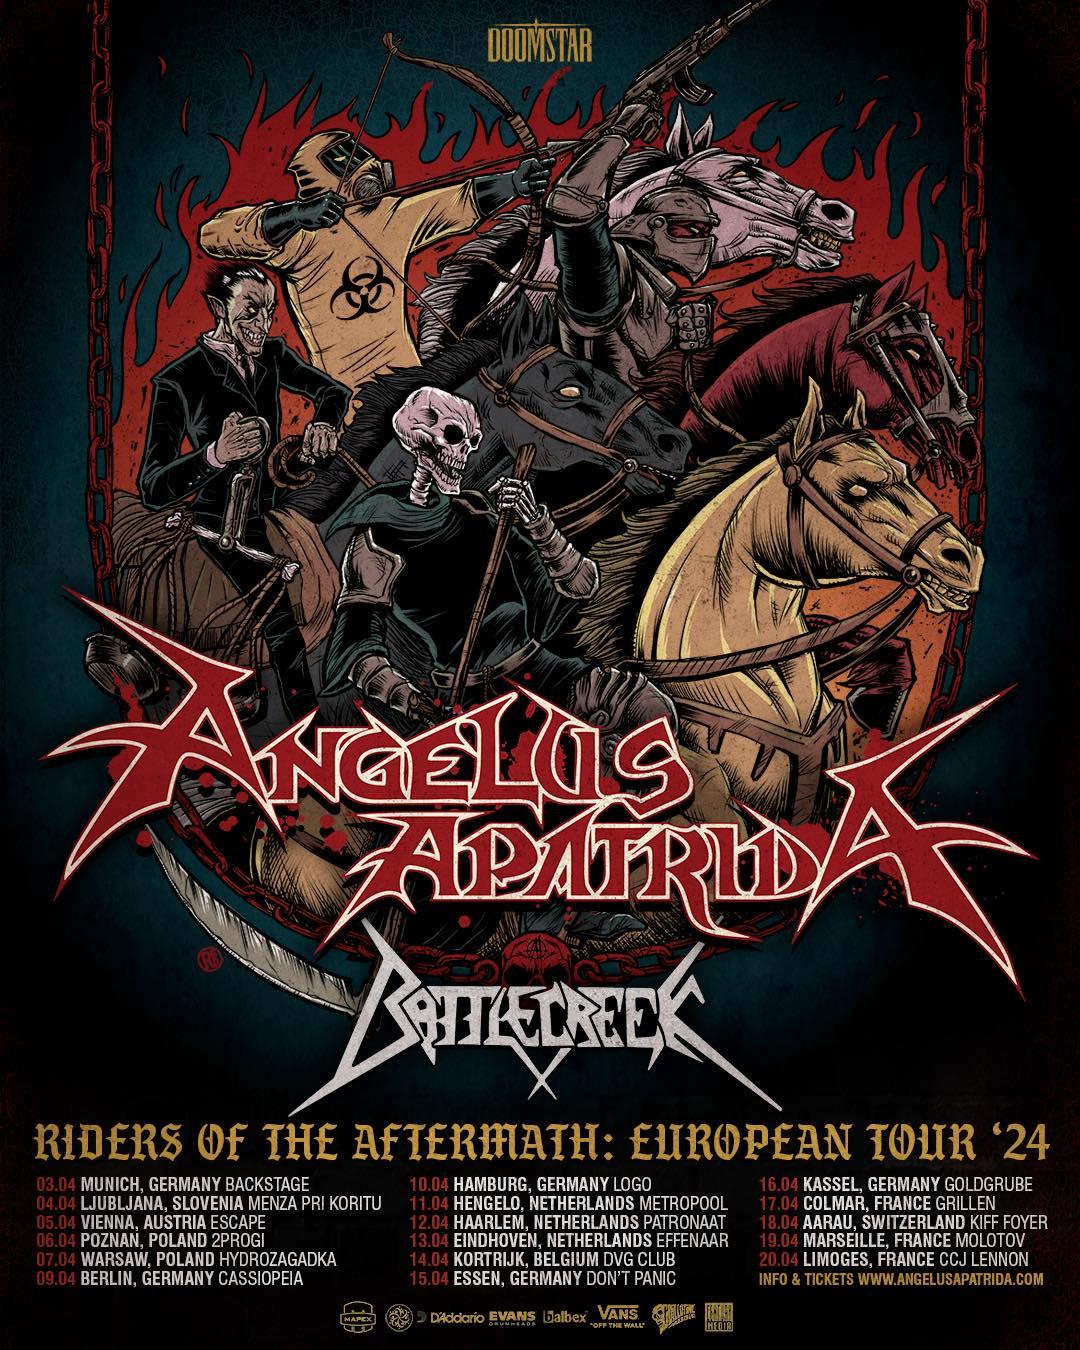 Riders of the aftermath eu tour 24